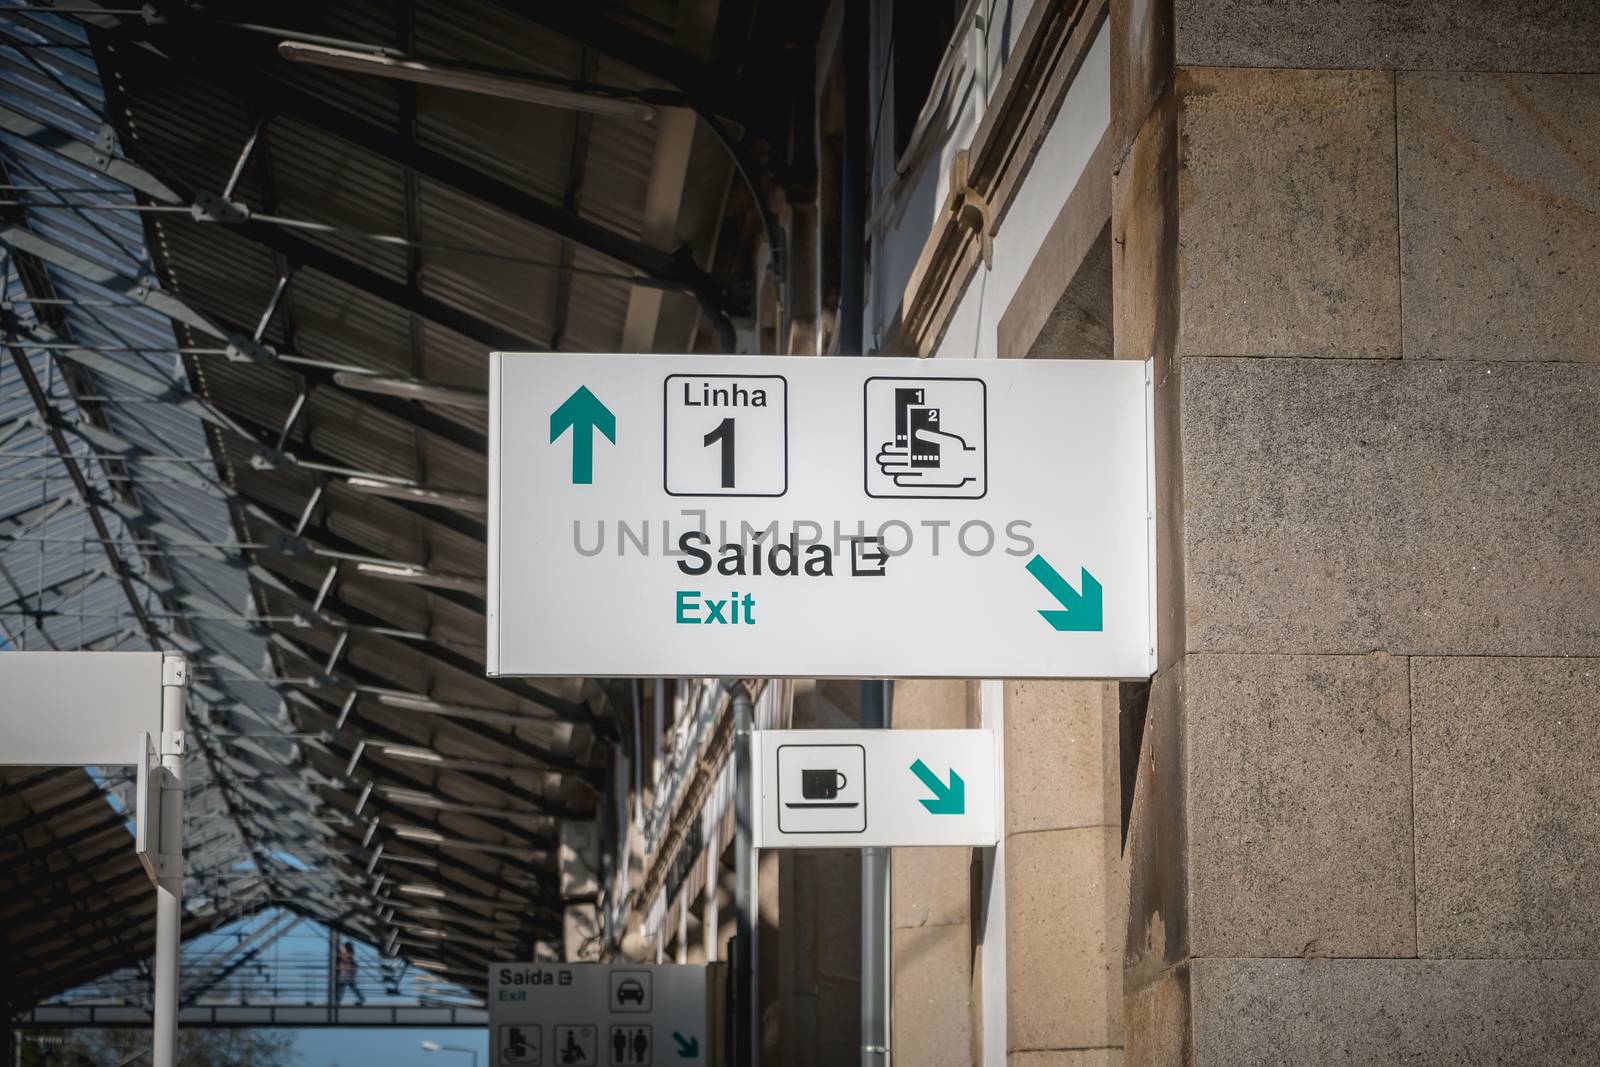 Viana do Castelo, Portugal - May 10, 2018: sign indicating the exit and line 1 in the train station on a spring day